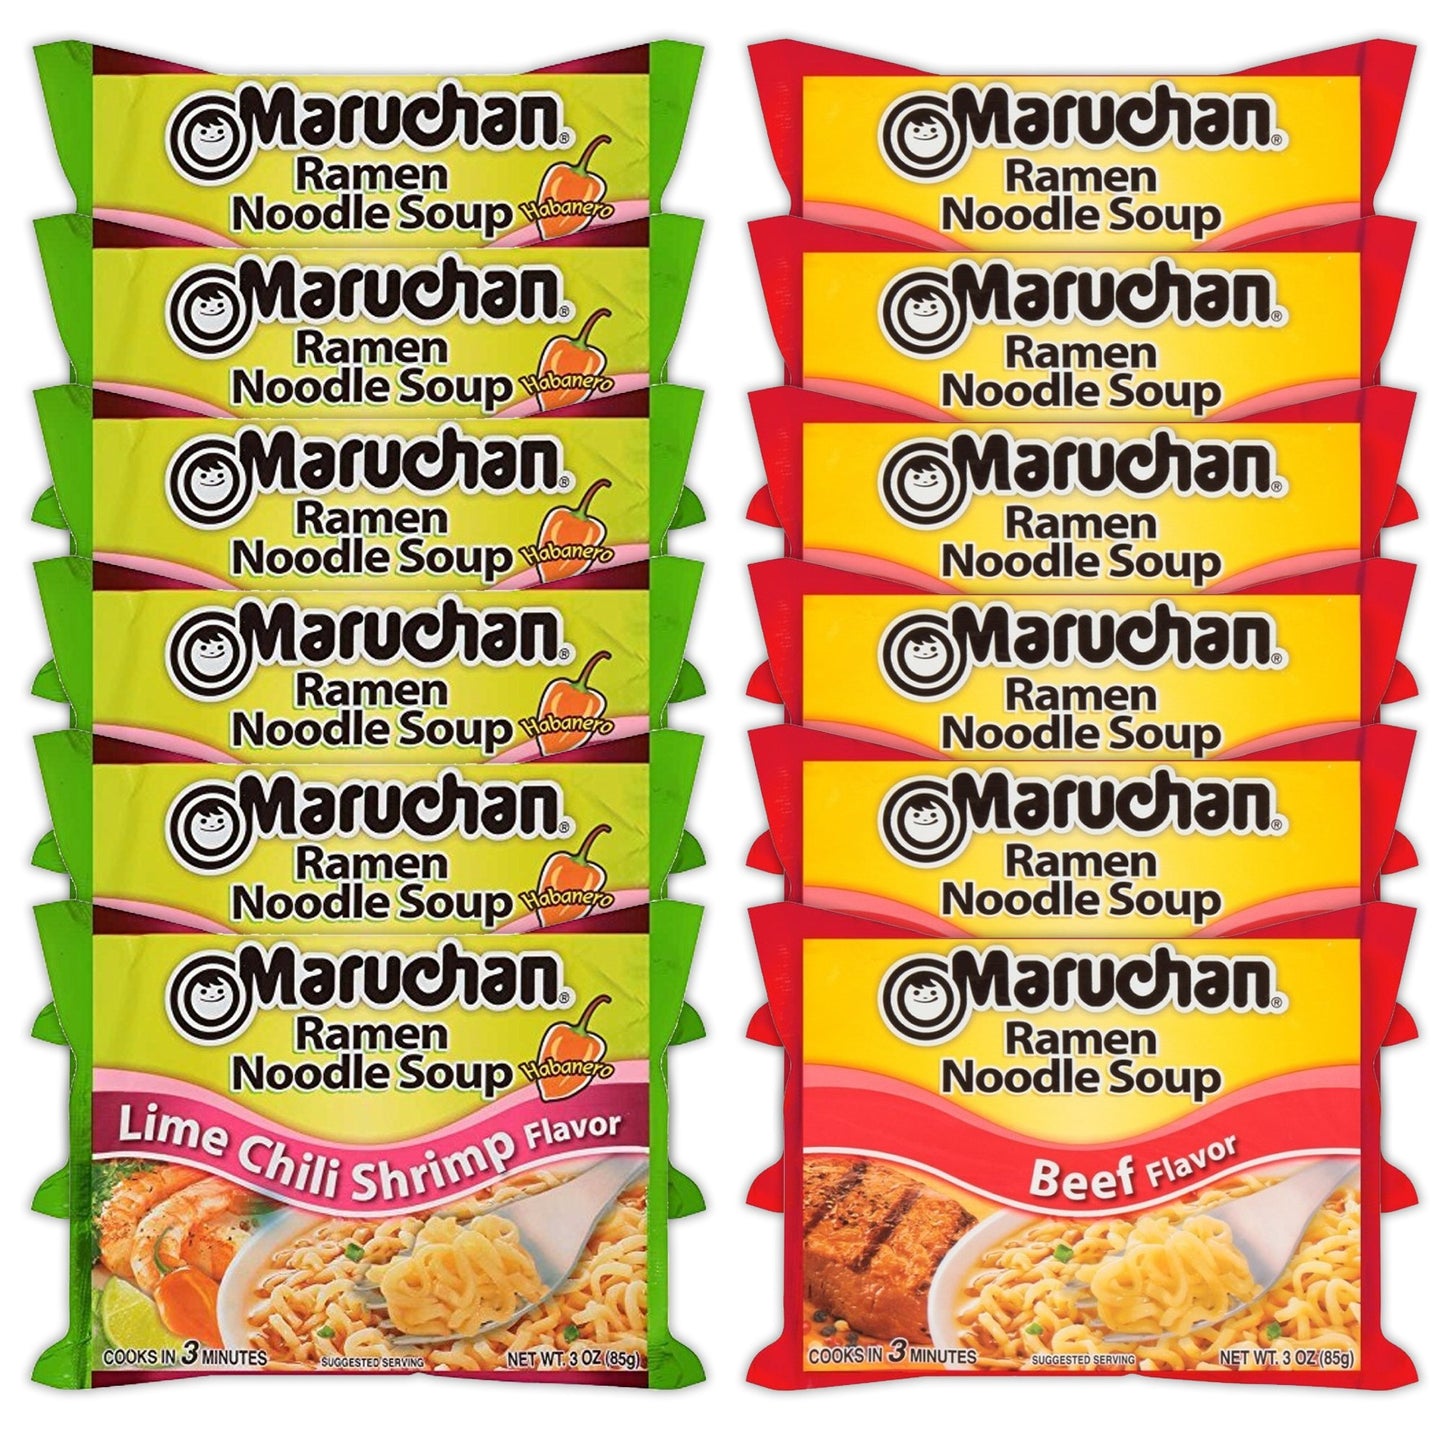 Maruchan Ramen Instant Noodle Soup Variety, 2 Flavors - 6 Packs Lime Chili Shrimp & 6 Packs Beef , 3 Ounce Single Servings Lunch / Dinner Variety